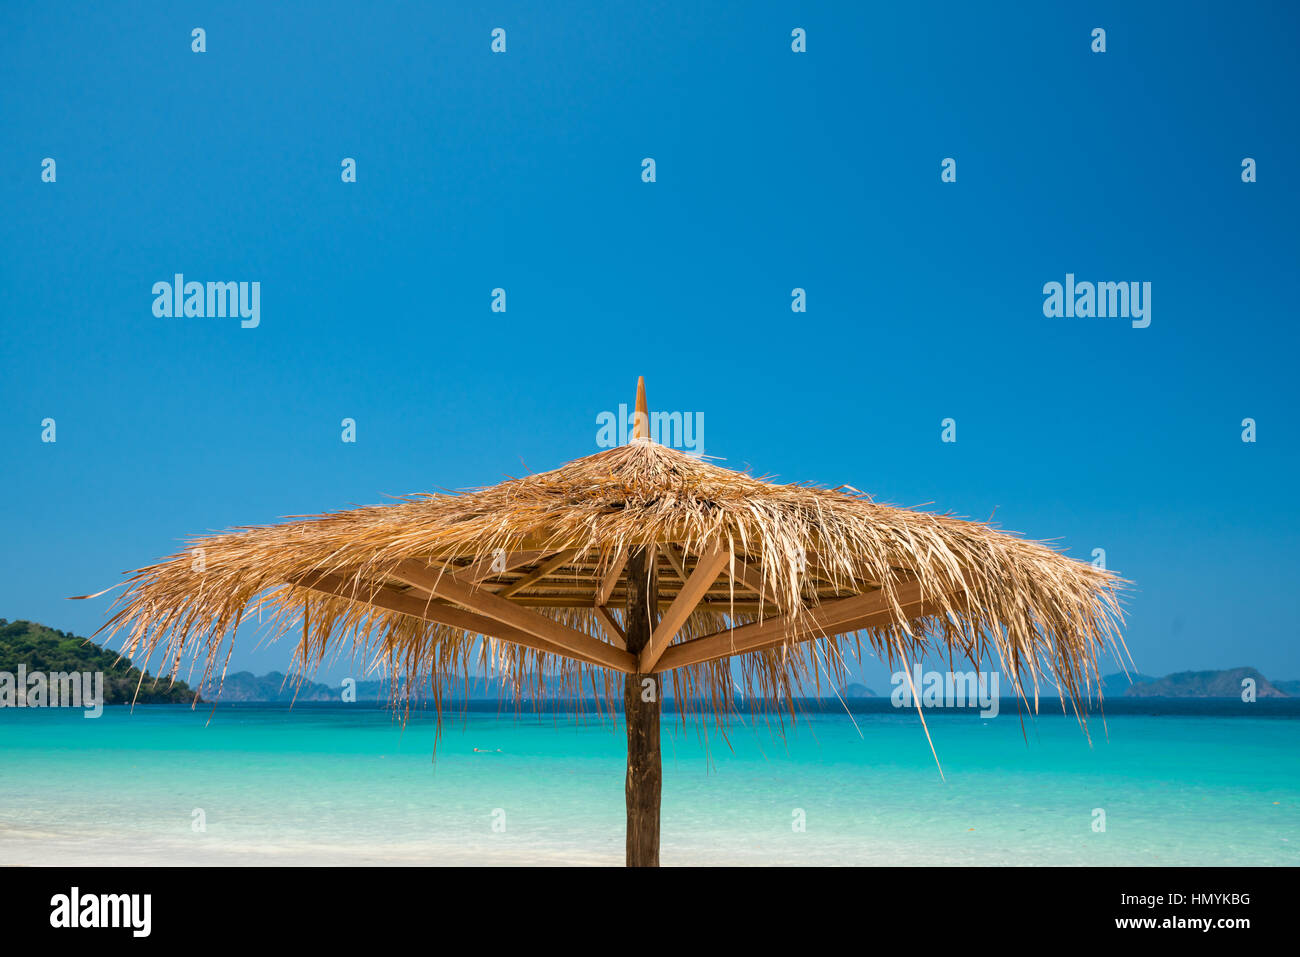 Beach Umbrella made of leafs on white beach in front of Sea day time blue sky wide shot background, Nyaung Oo Phee, Myanmar Stock Photo